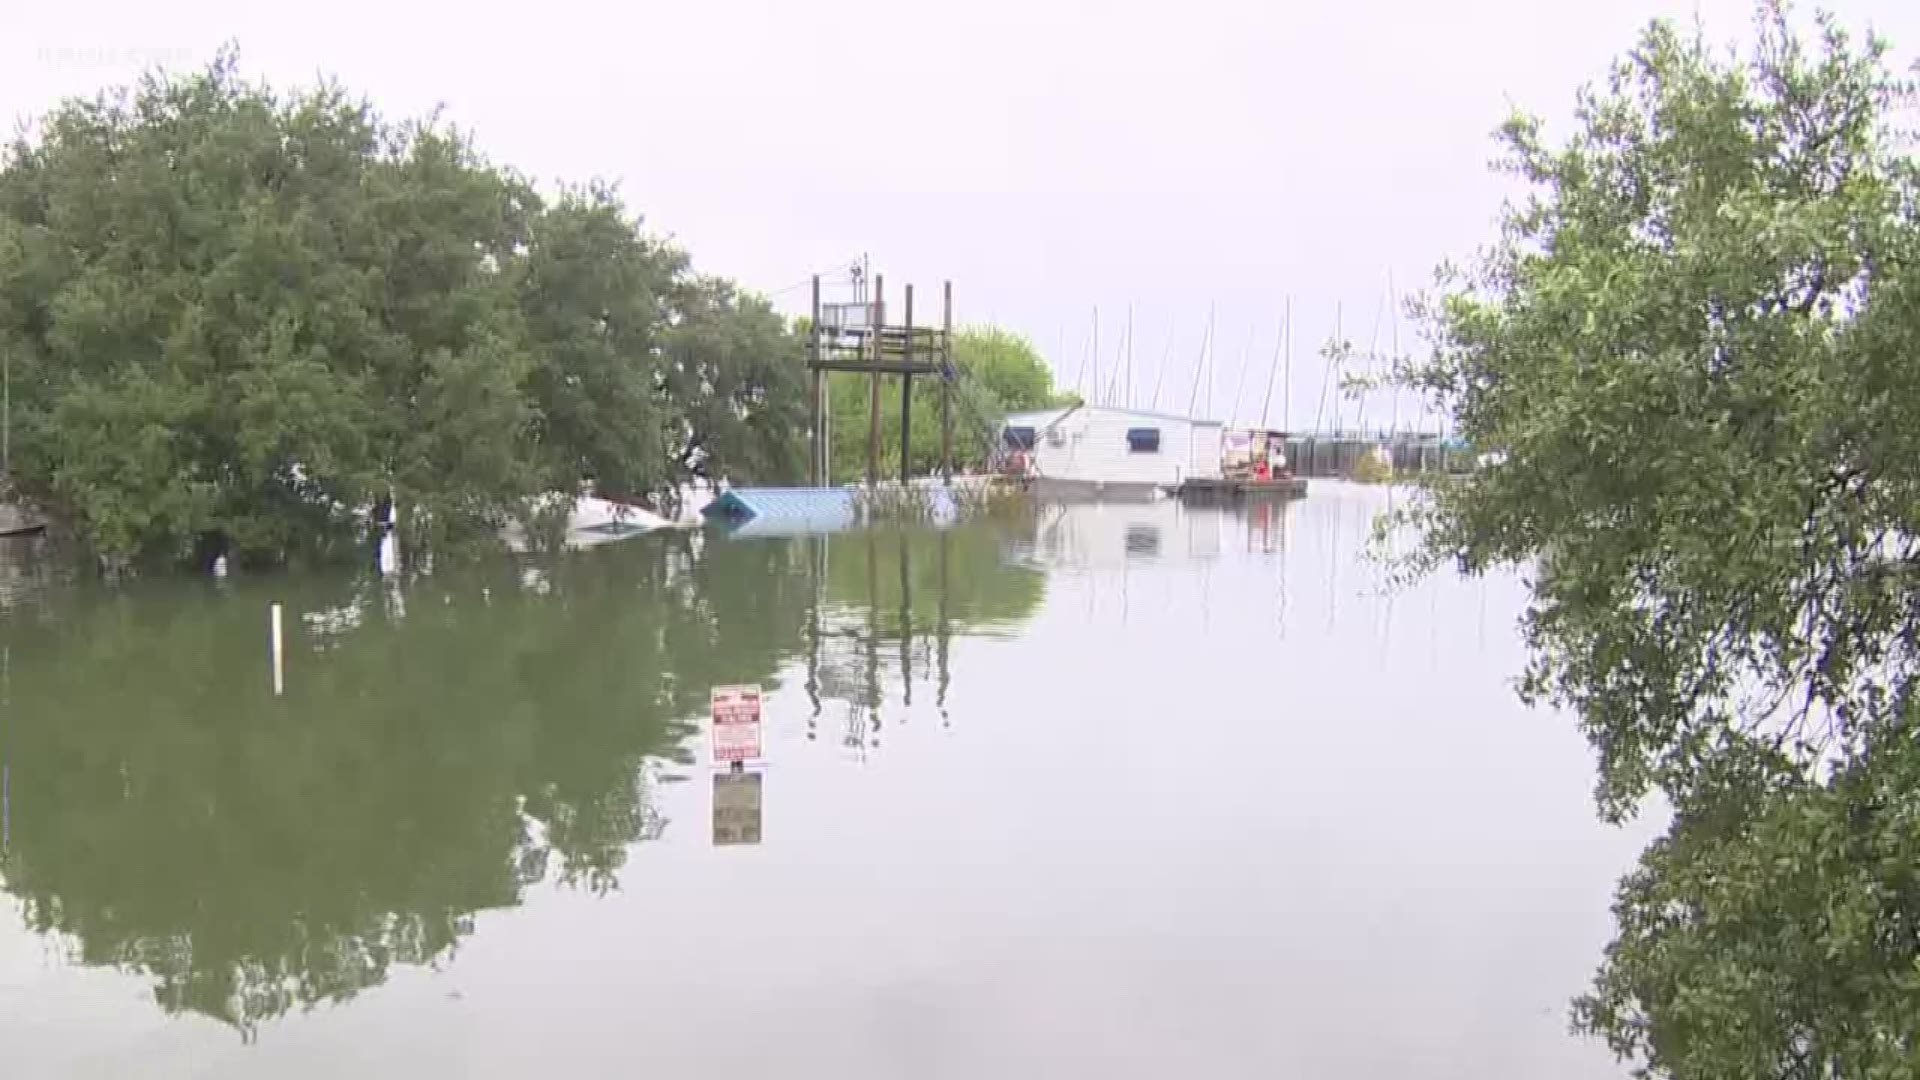 The Lower Colorado River Authority say the lake level in Austin will likely crest on Saturday four feet lower than originally expected.